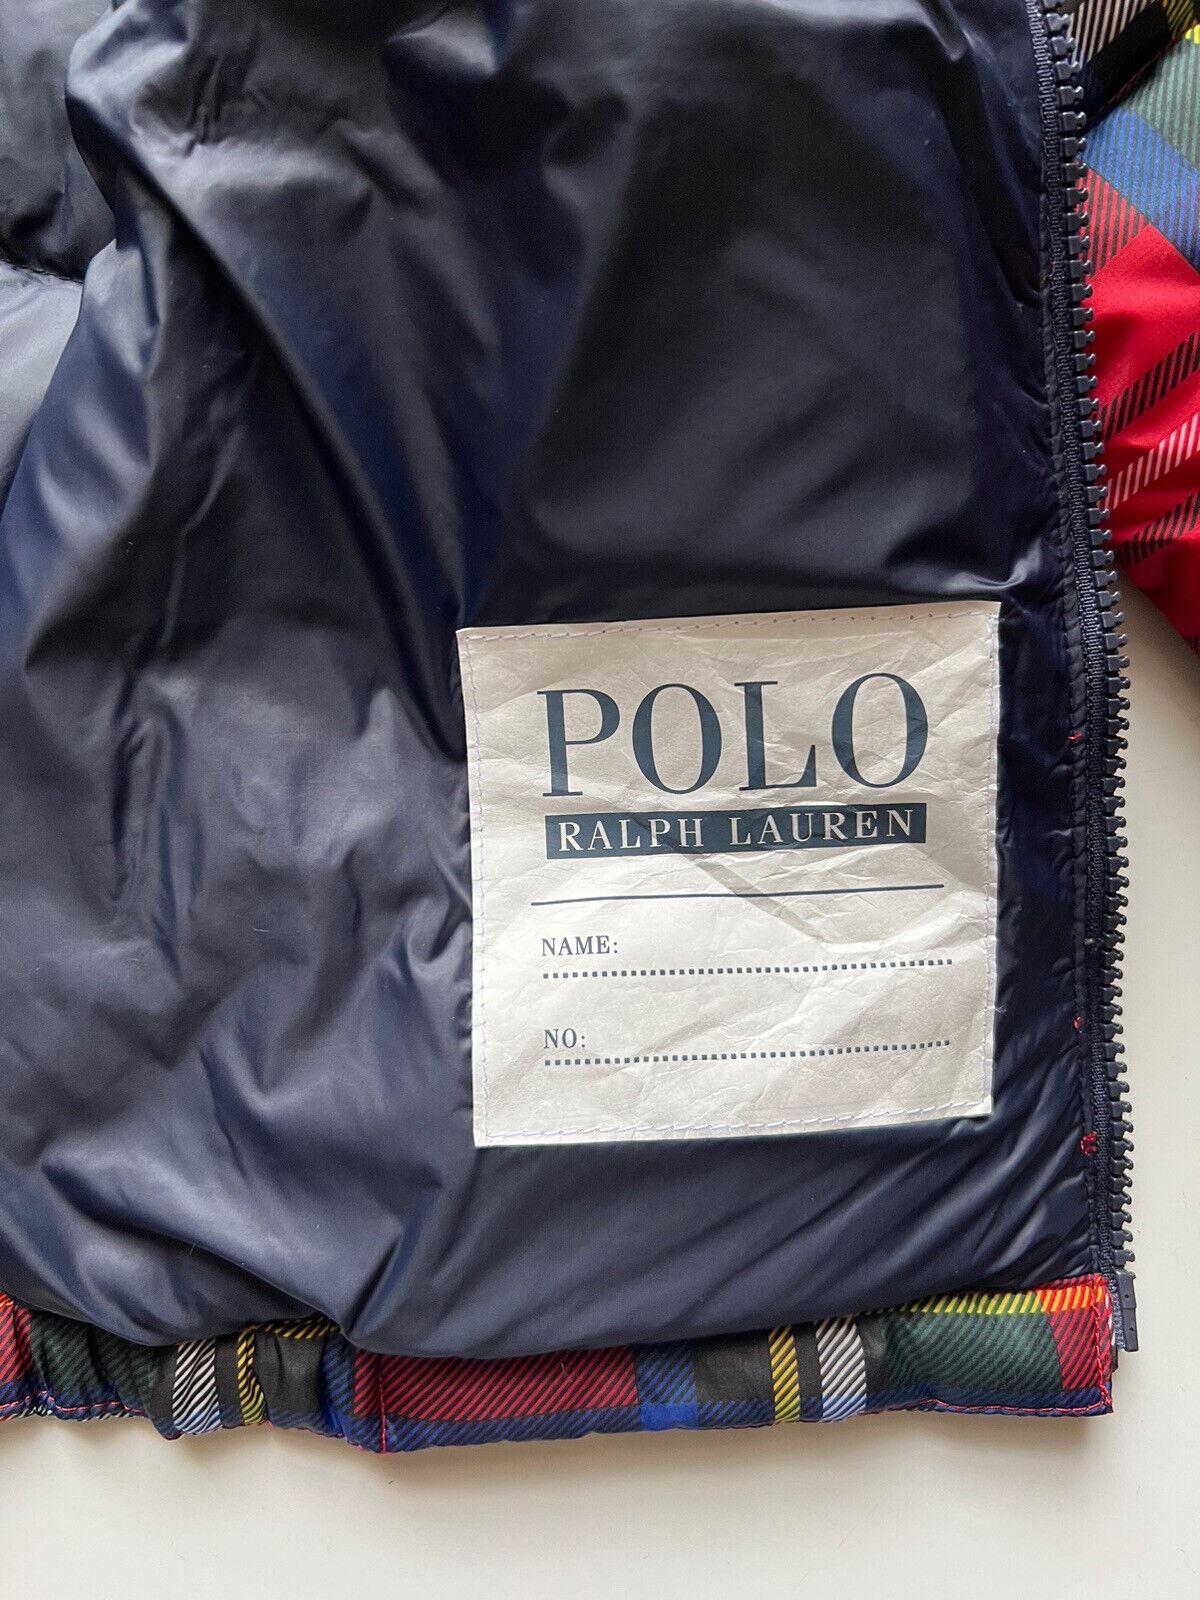 NWT $185 Polo Ralph Lauren Boy's Jacket with Hoodie Red S (8Y)